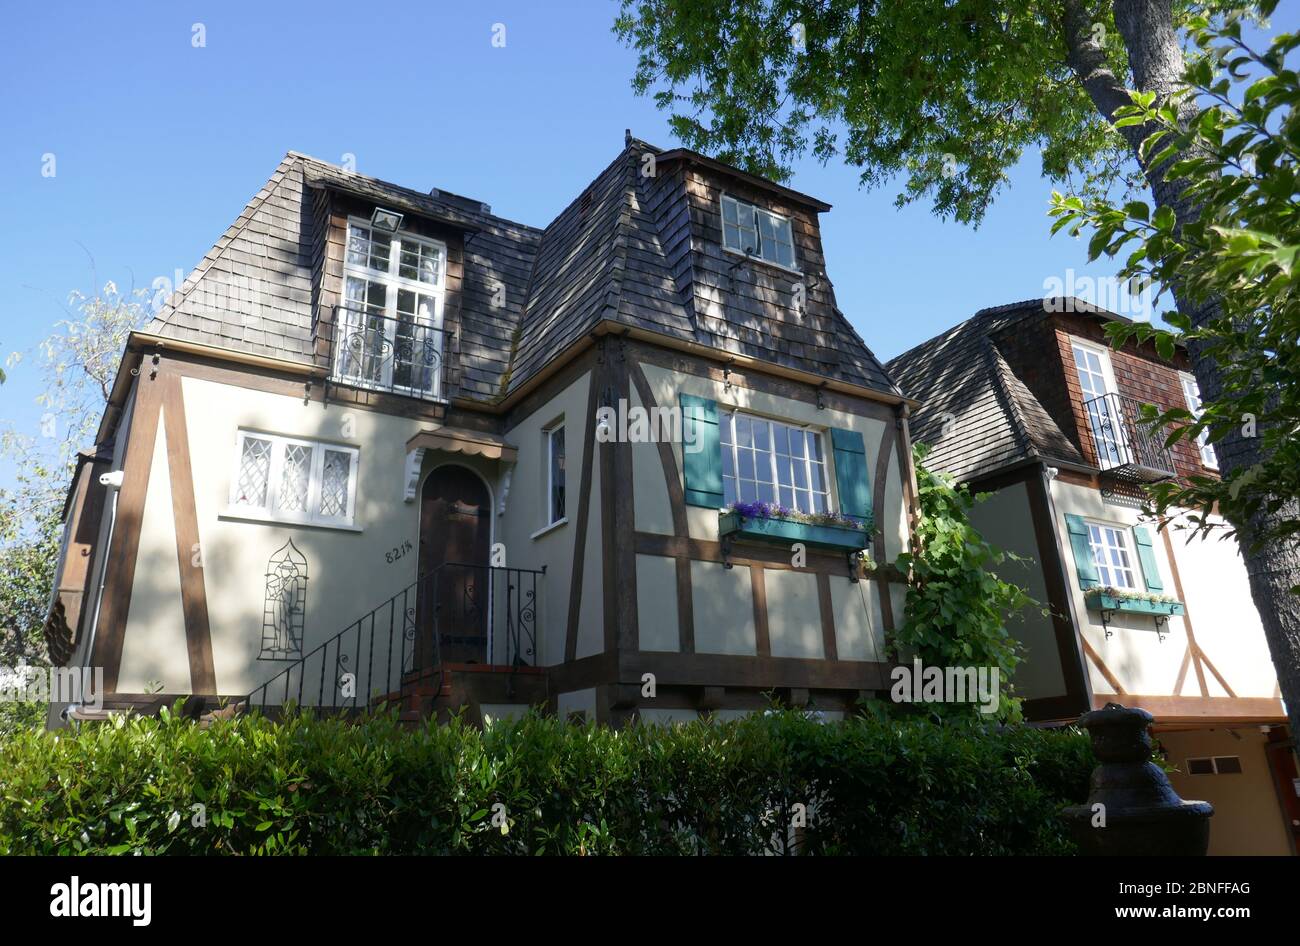 West Hollywood, California, USA 14th May 2020 A general view of atmosphere  of The Charlie Hotel, originally Charlie Chaplin built these cottages to  house actors and Charlie Chaplin, Marilyn Monroe, Judy Garland,